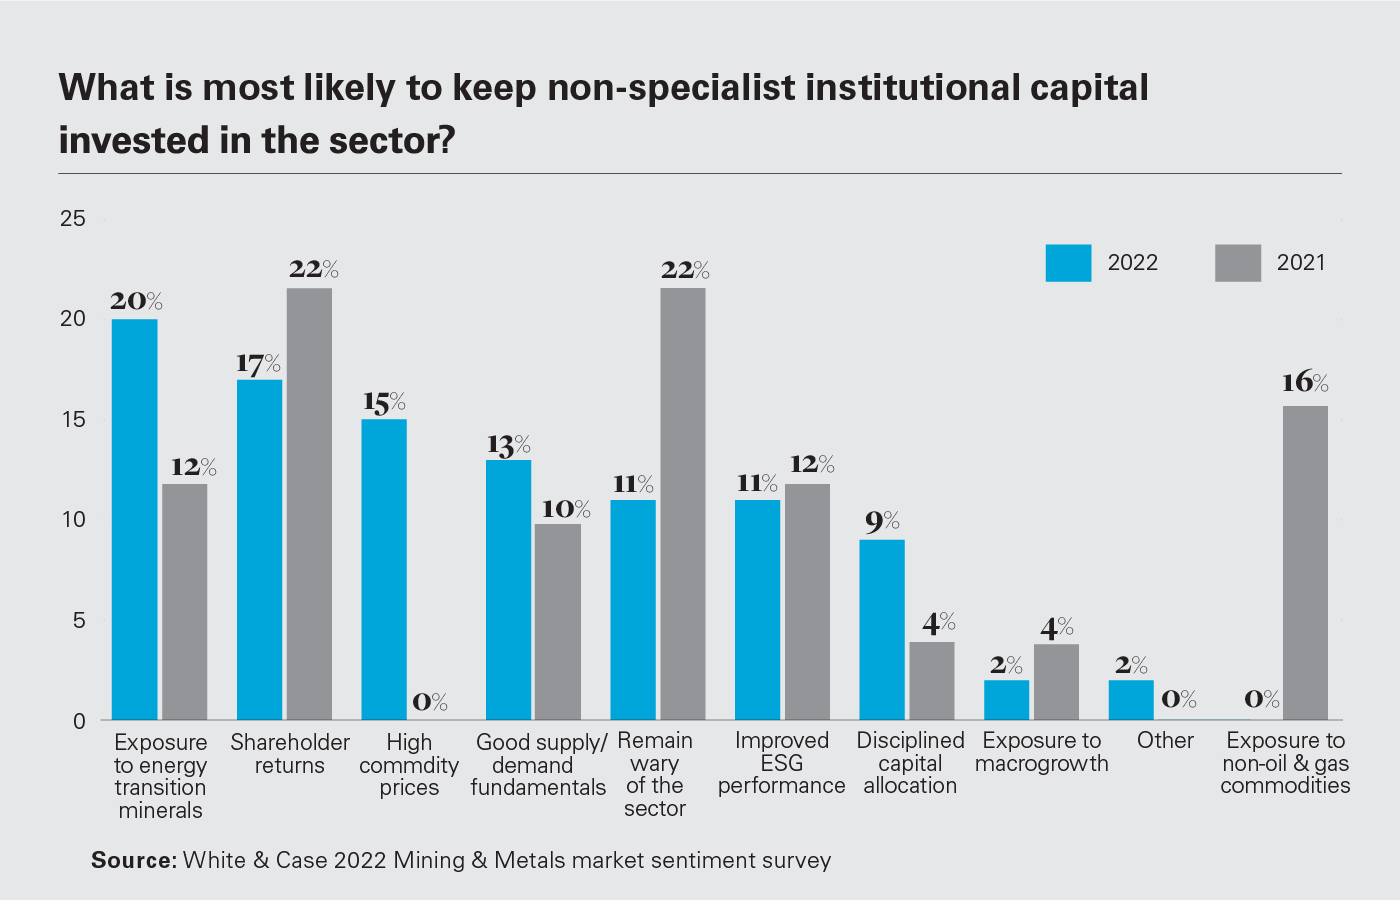 What is most likely to keep non-specialist institutional capital invested in the sector?